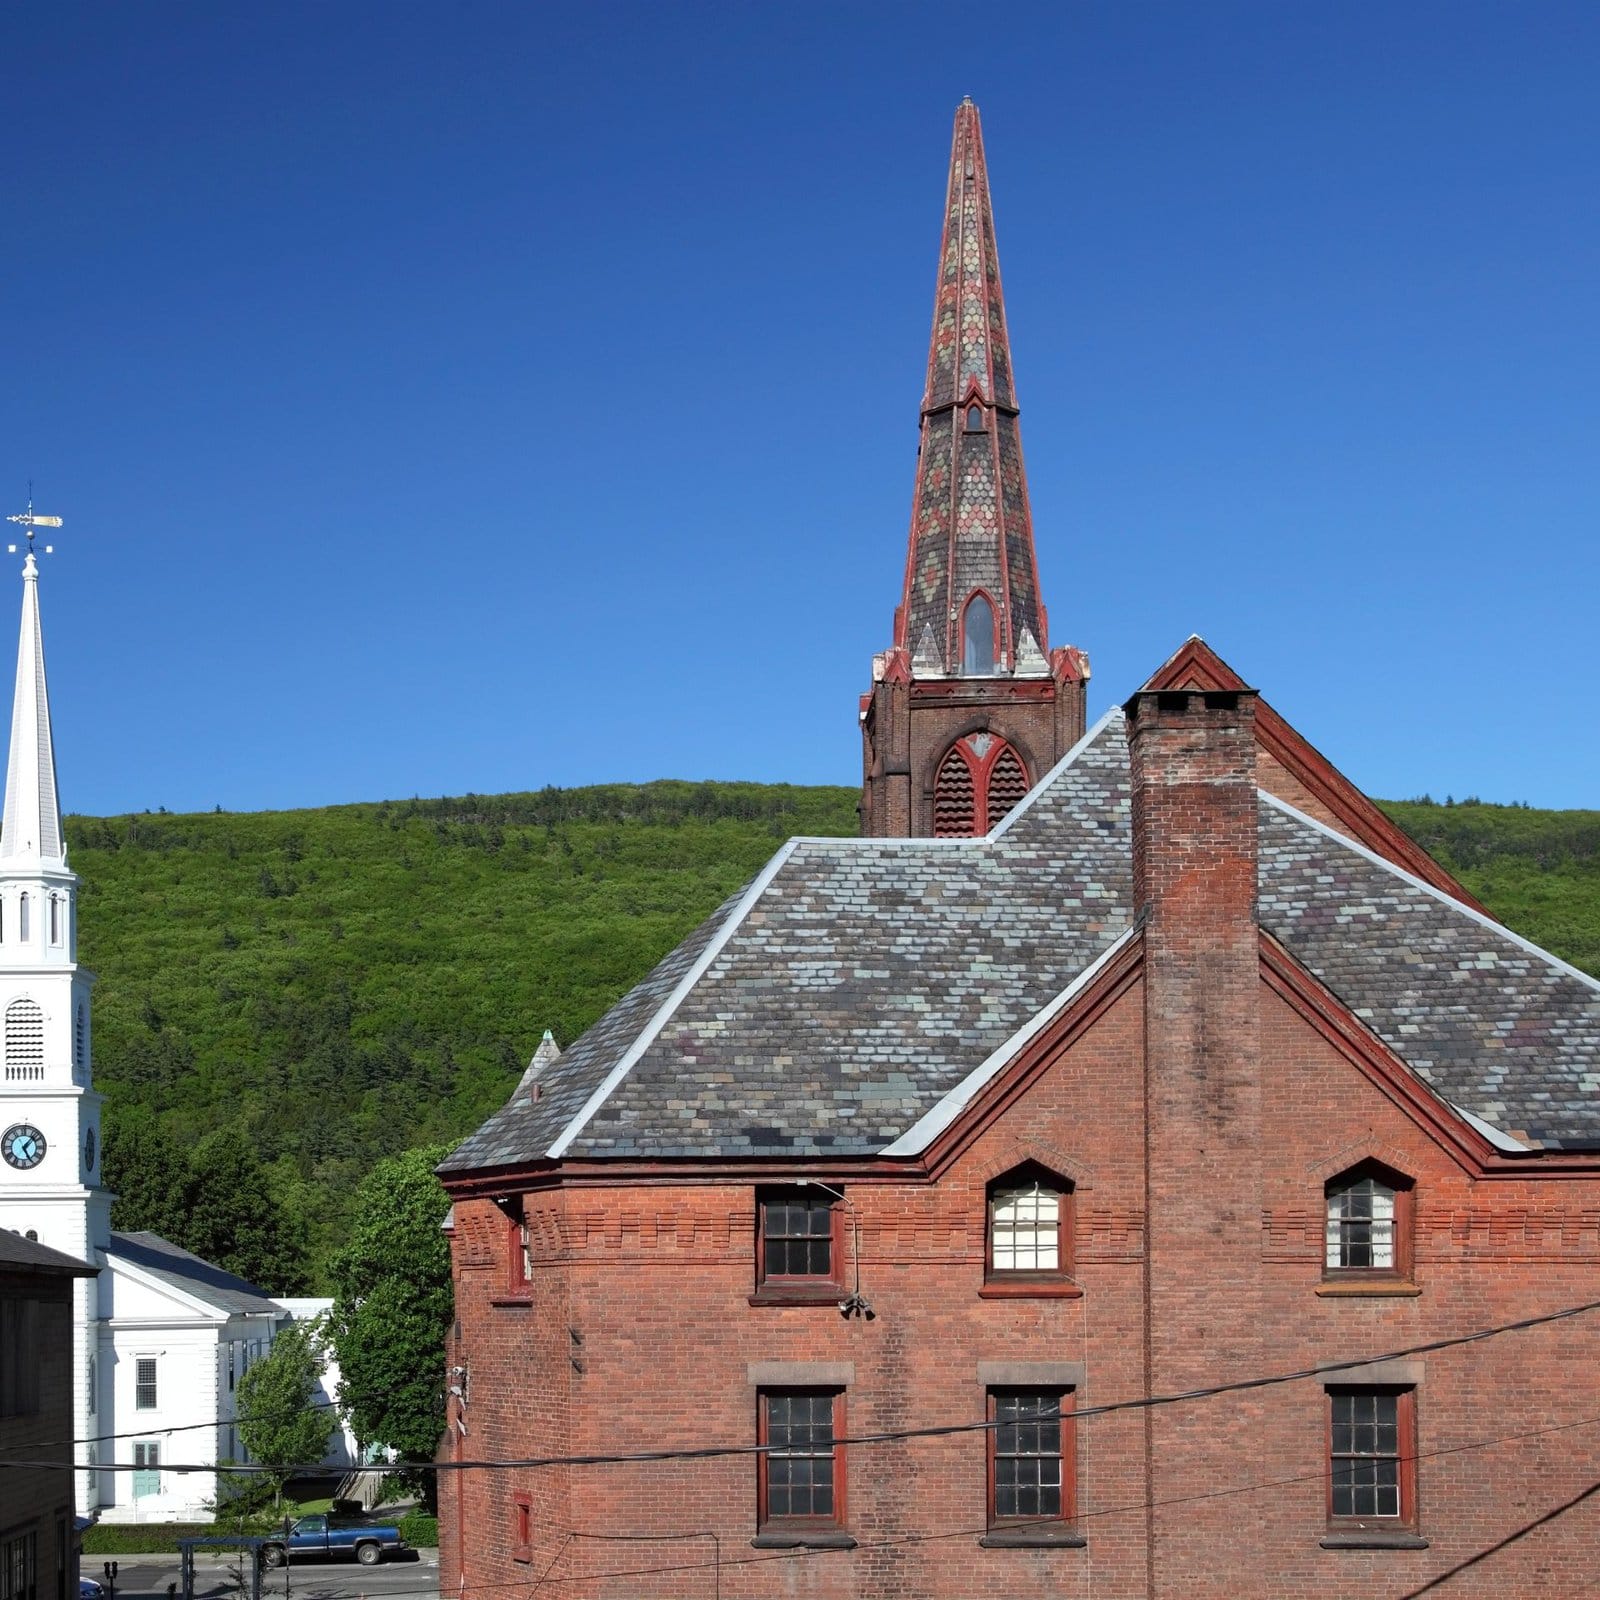 sell commercial real estate in Brattleboro, VT